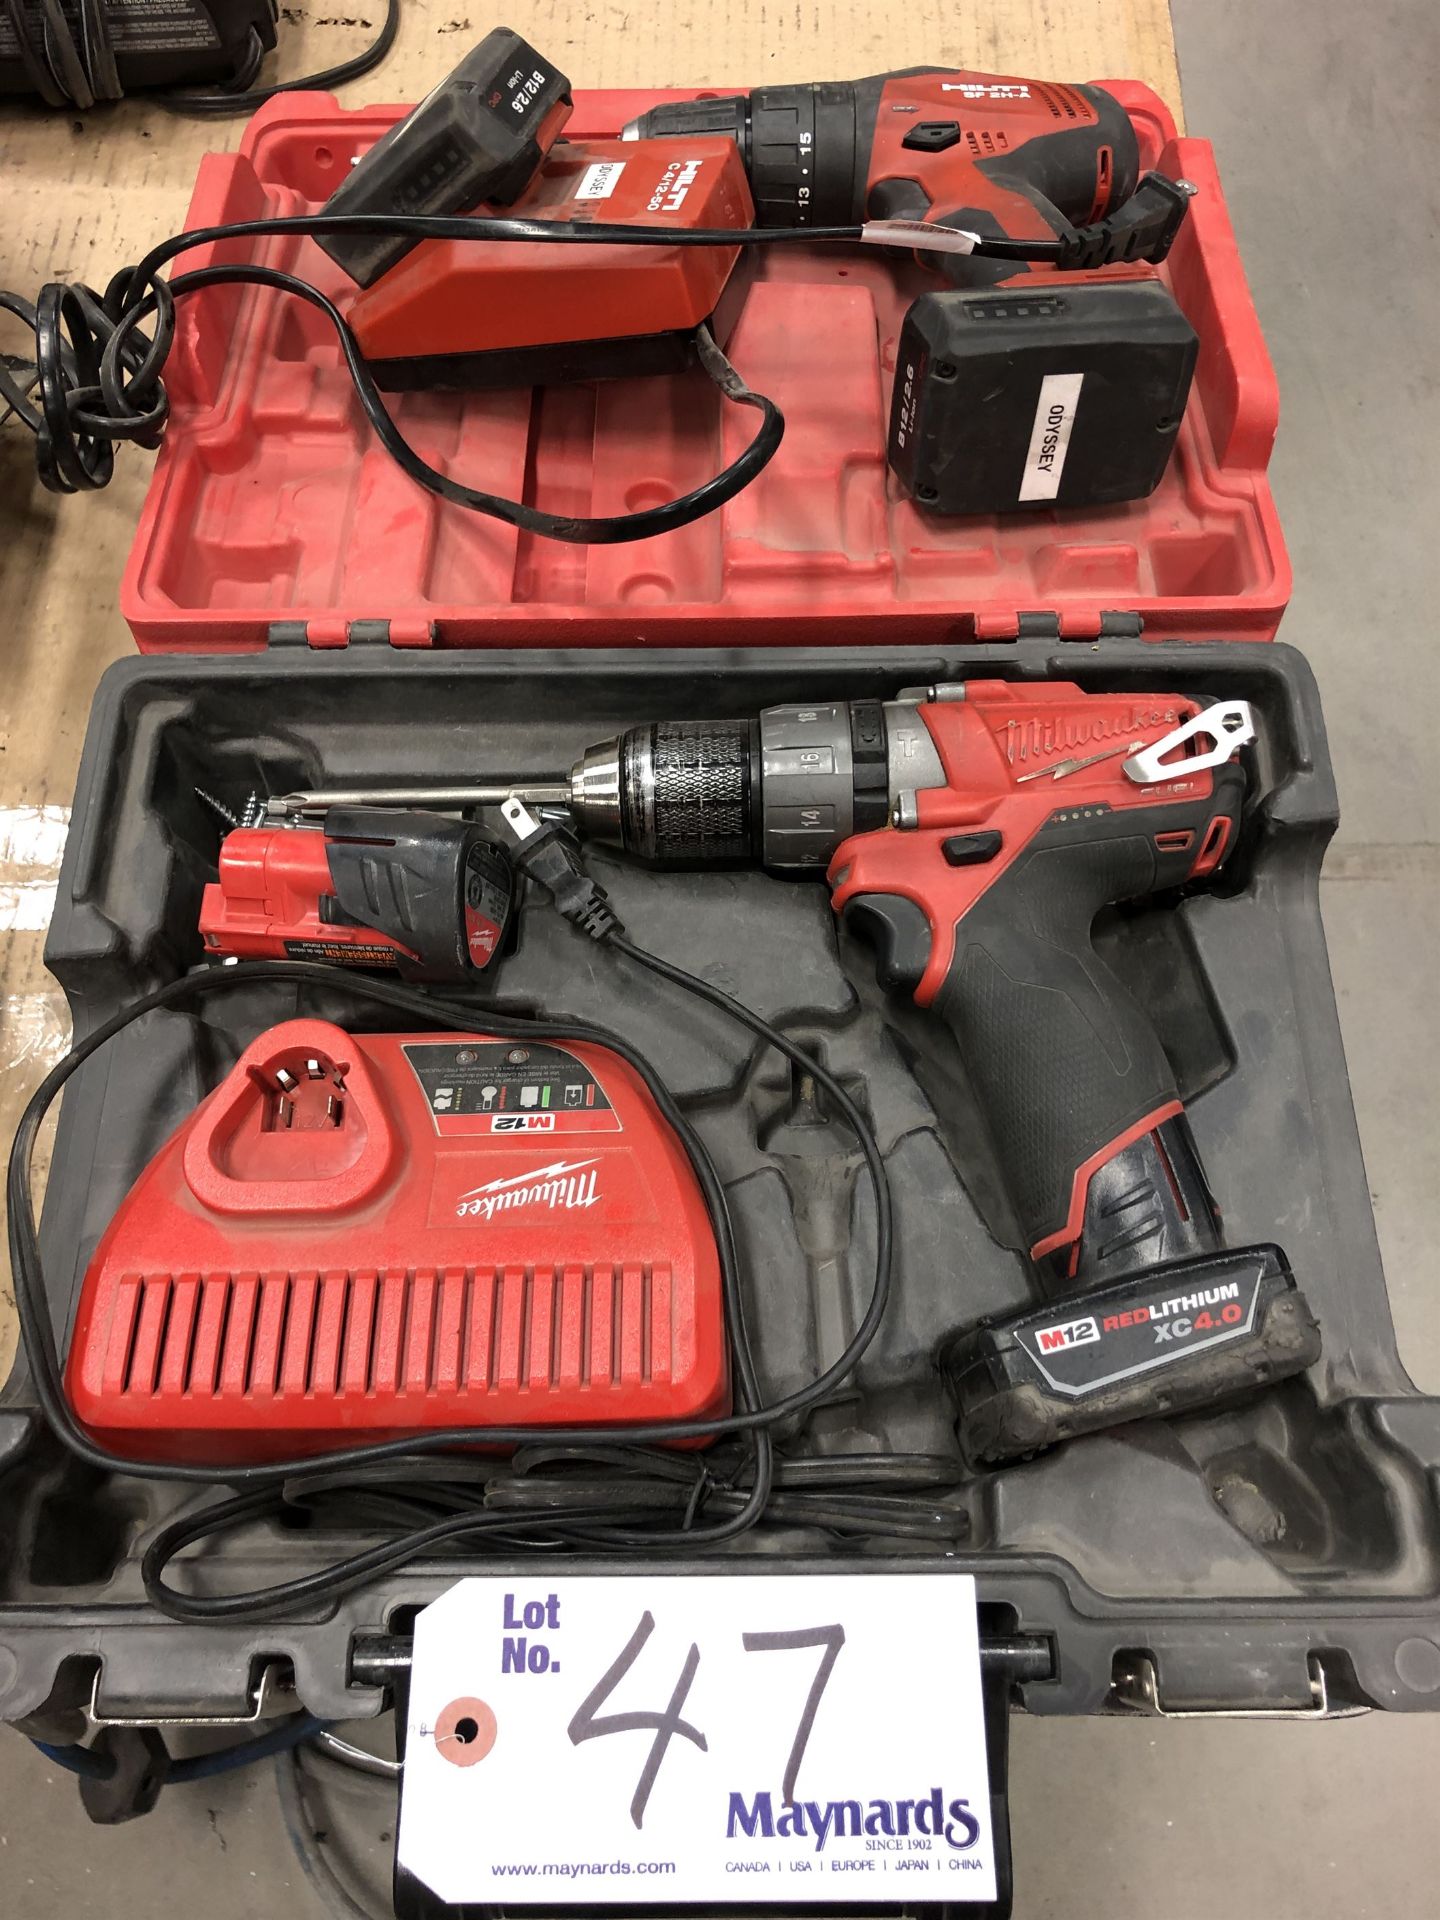 Lot of (2) MILWAUKEE/HILTI Cordless Drills w/ Chargers